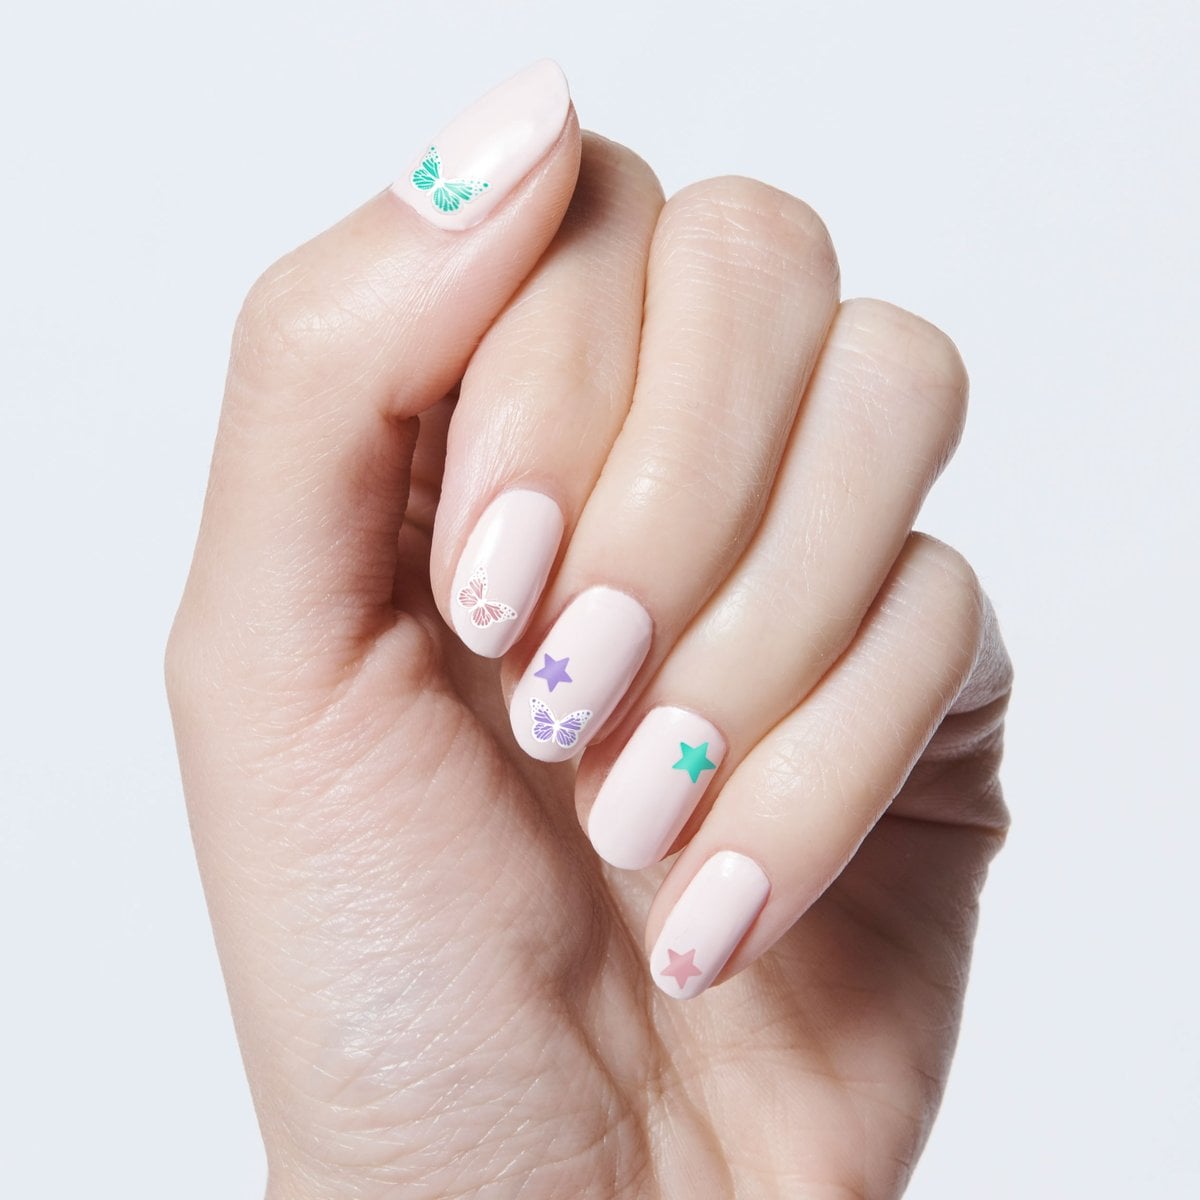 Olive And June Nail Art Ideas 